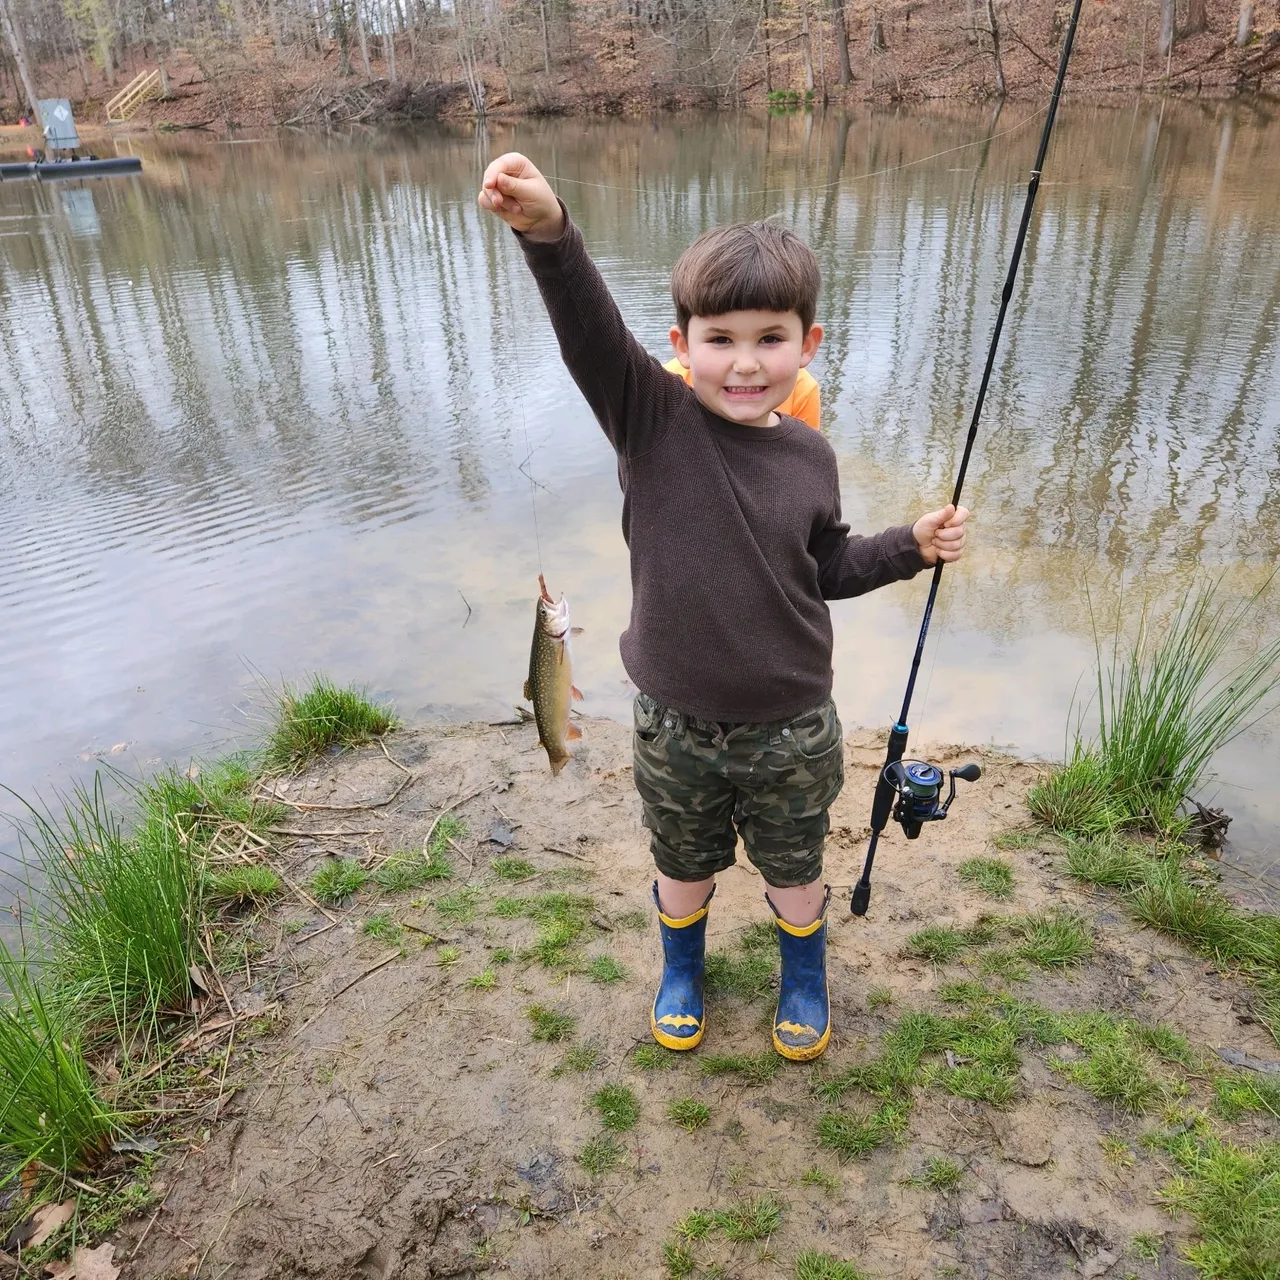 A young boy holding onto a fishing pole